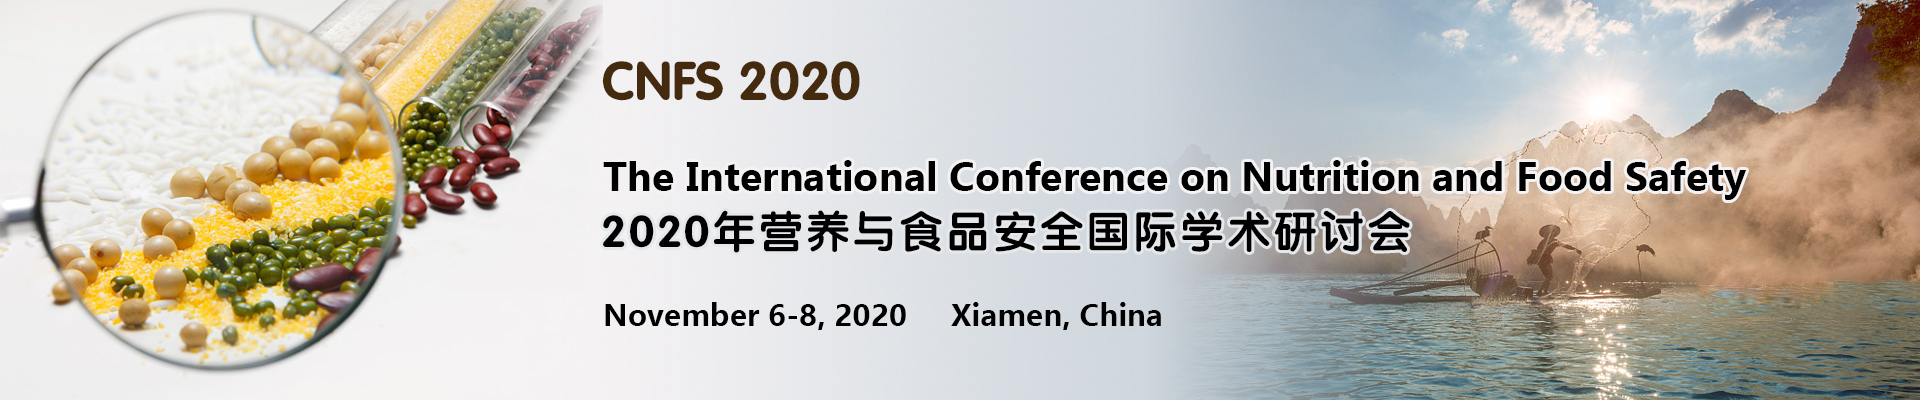 International Conference on Nutrition and Food Safety (CNFS 2020), Xiamen, Fujian, China